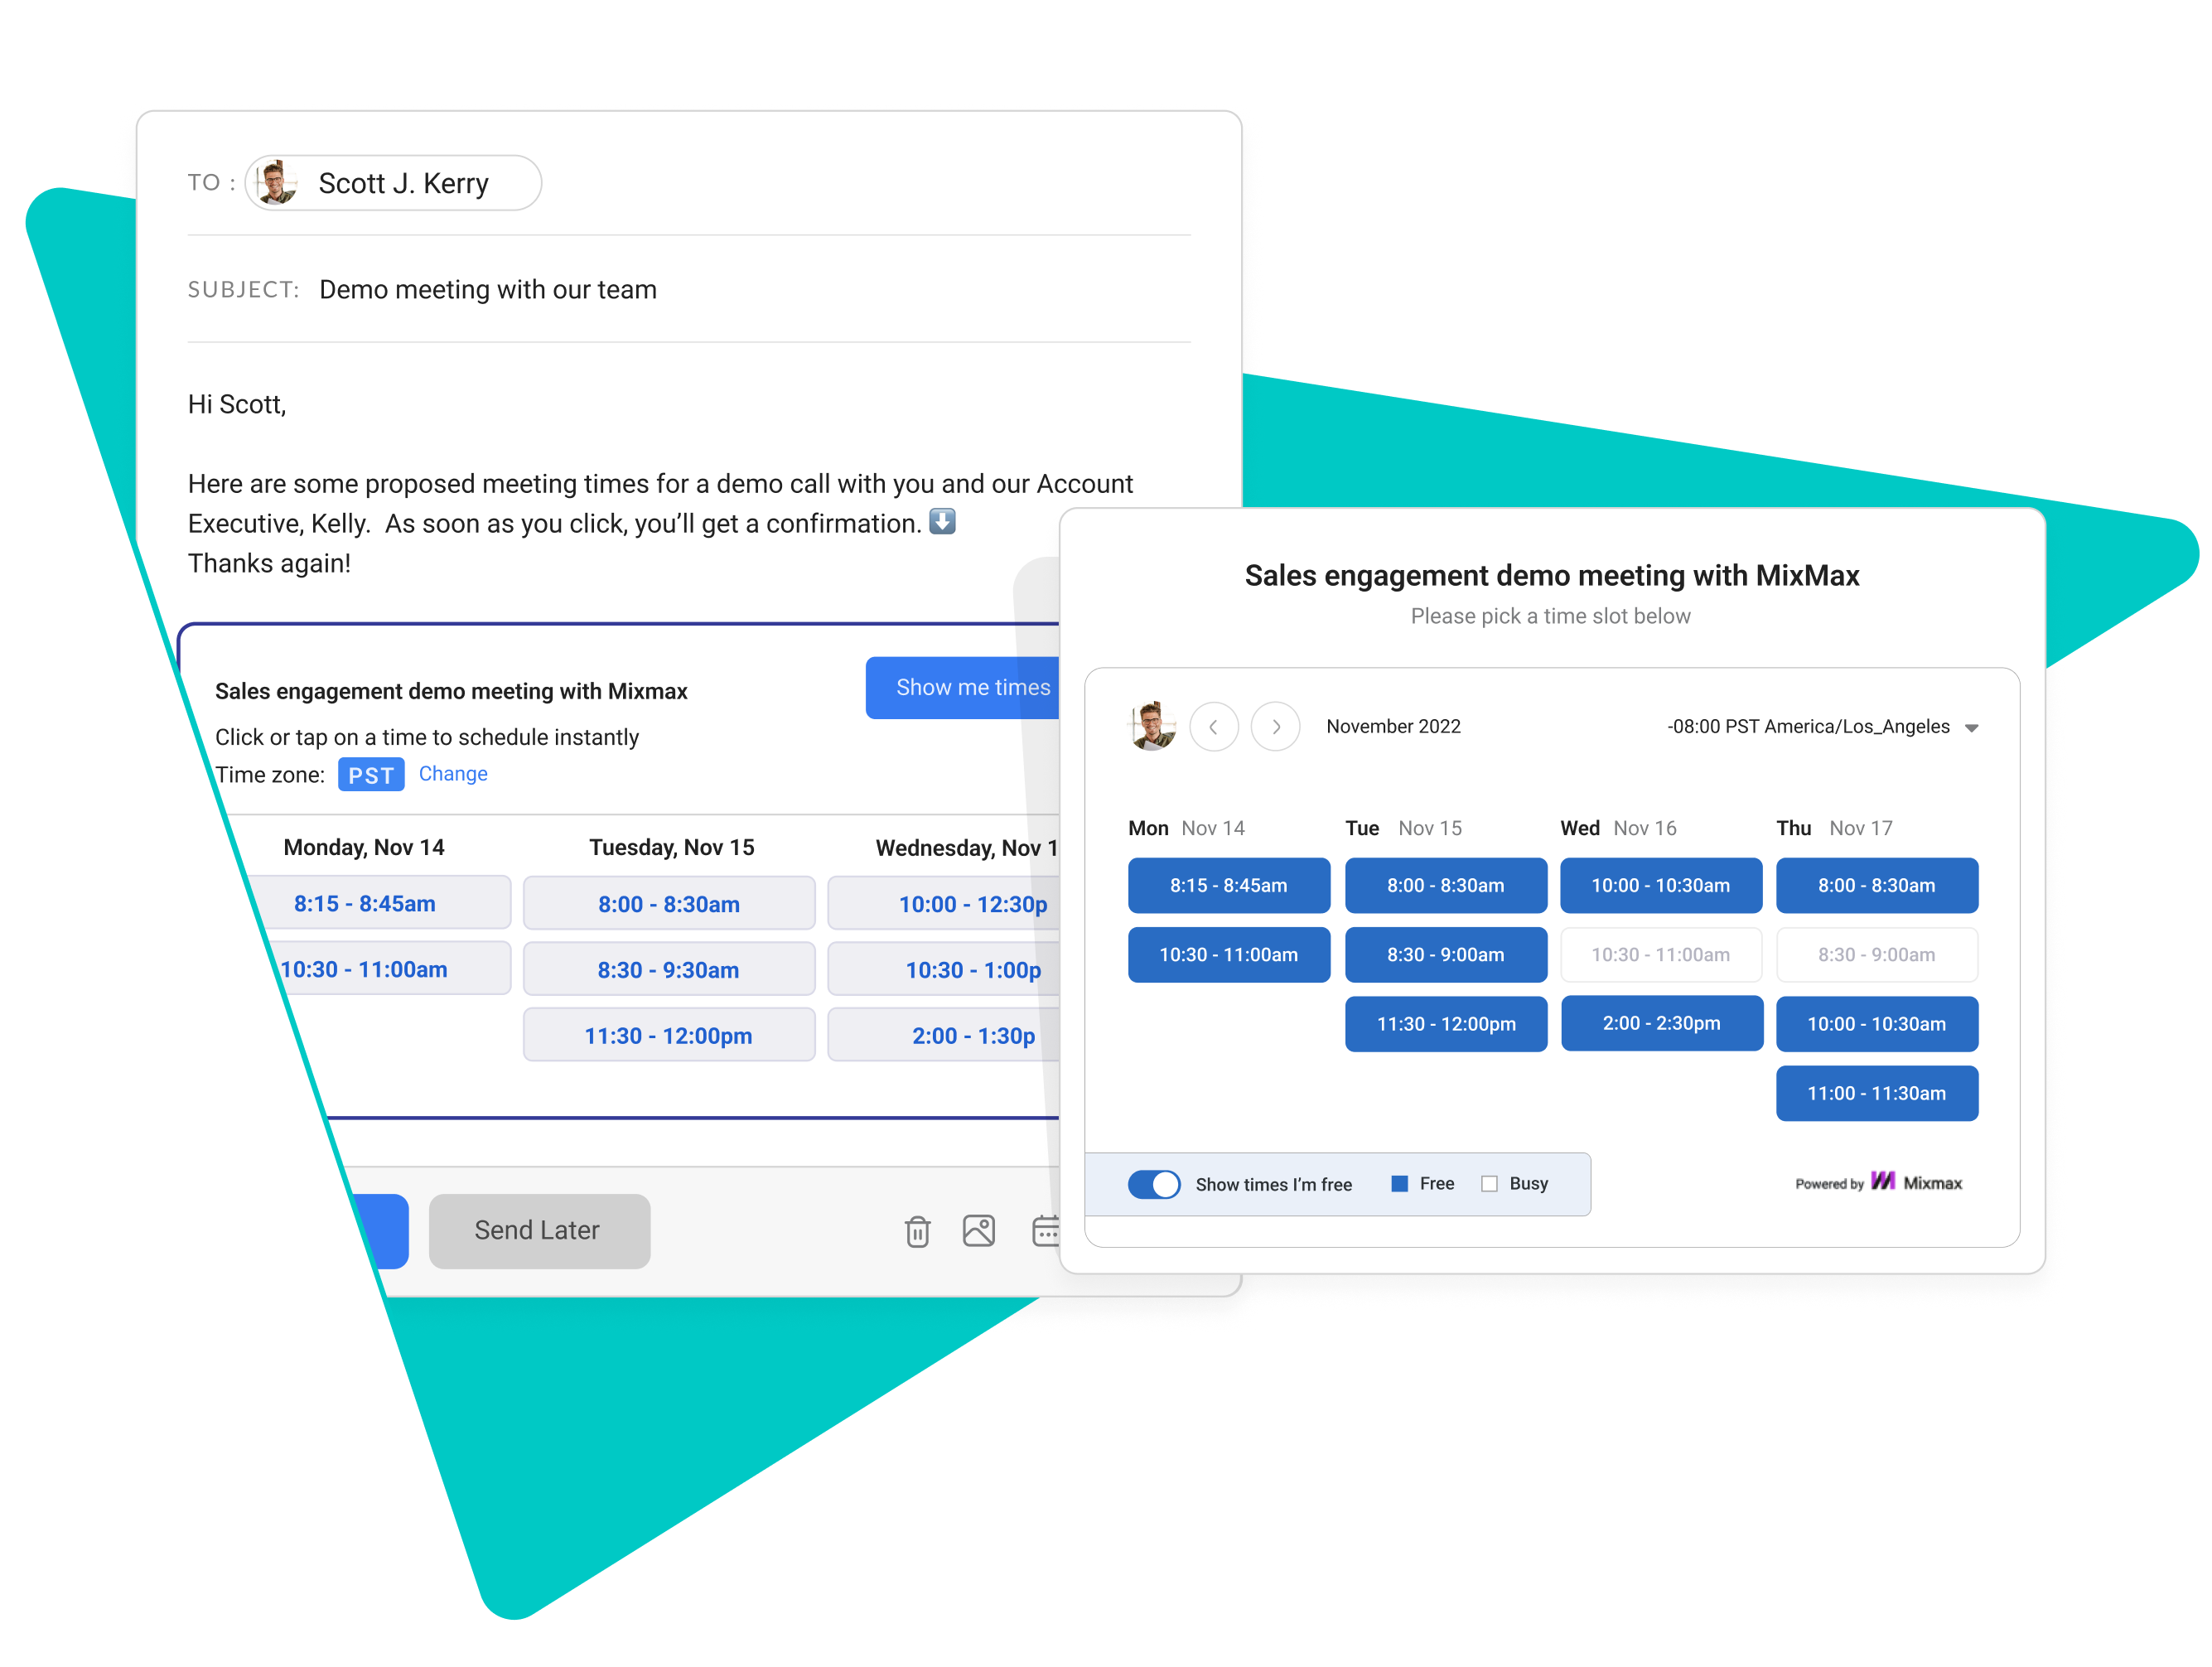 Enable prospects and customers to schedule time with you in one click by sharing your calendar availability in email. Simplify coordination by allowing recipients to compare with their own calendar availability.